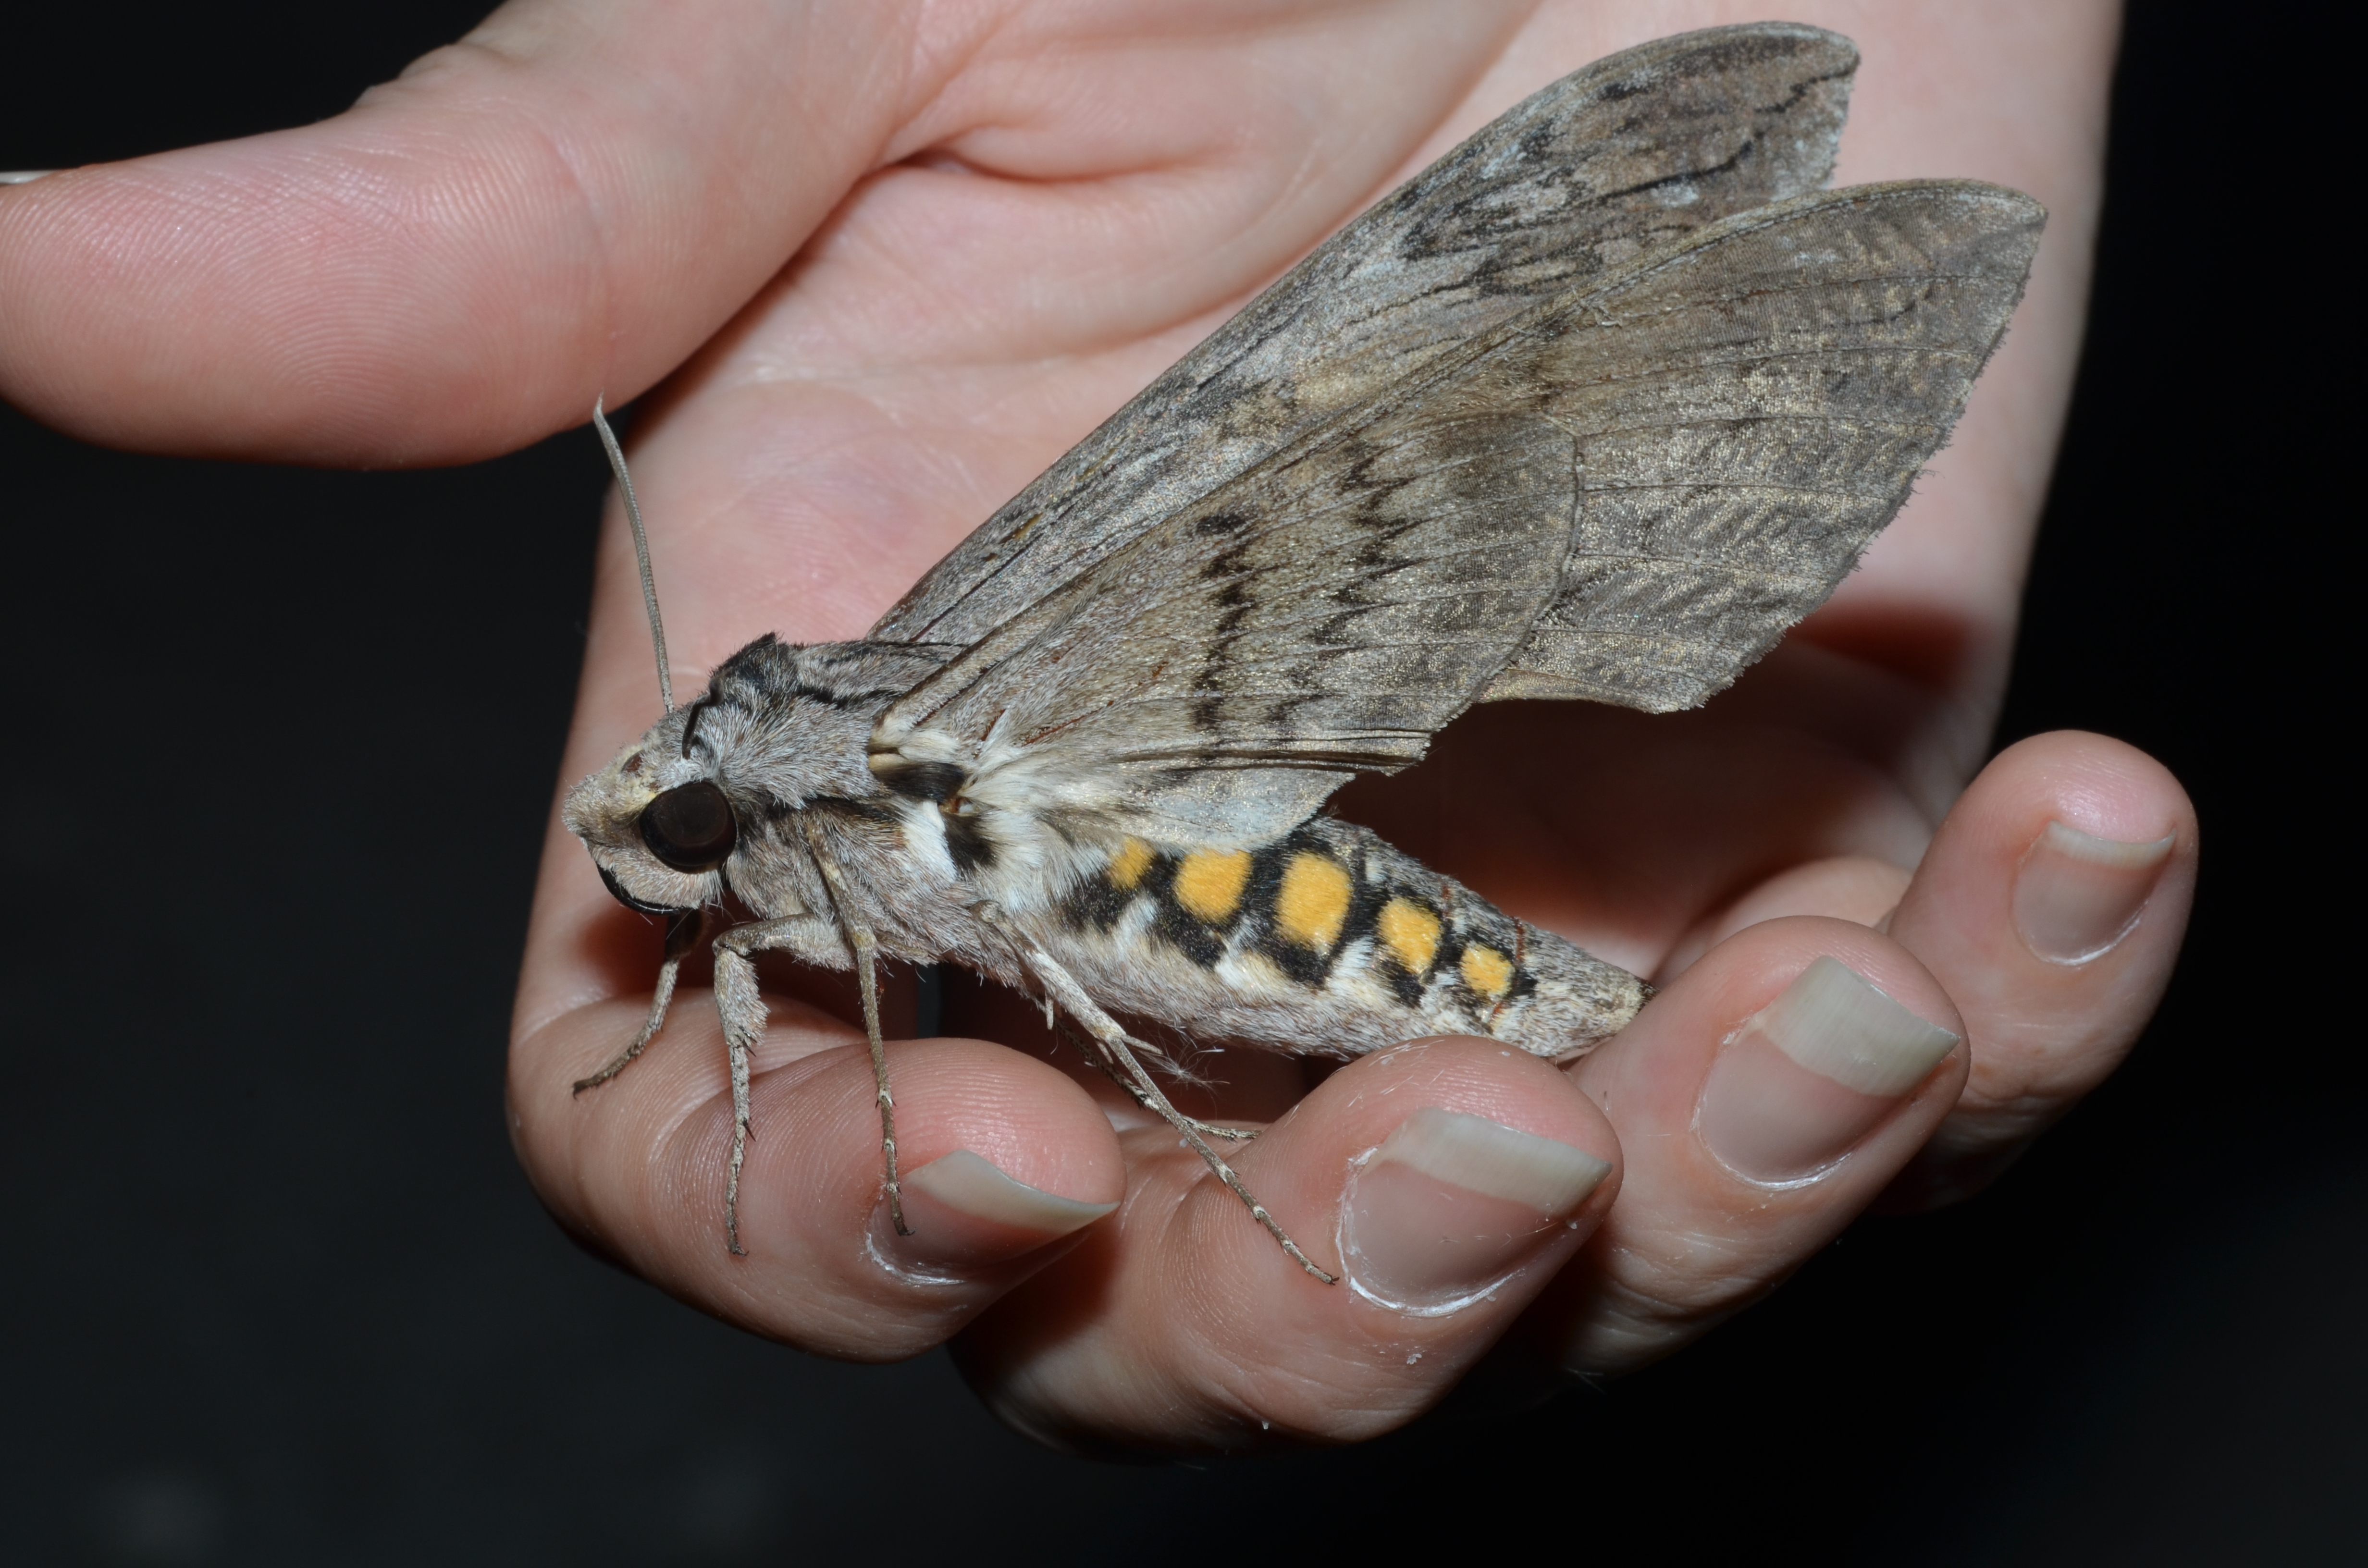 Manduca quinquemaculatus – Five-spotted Hawk Moth standing on a woman’s hand.